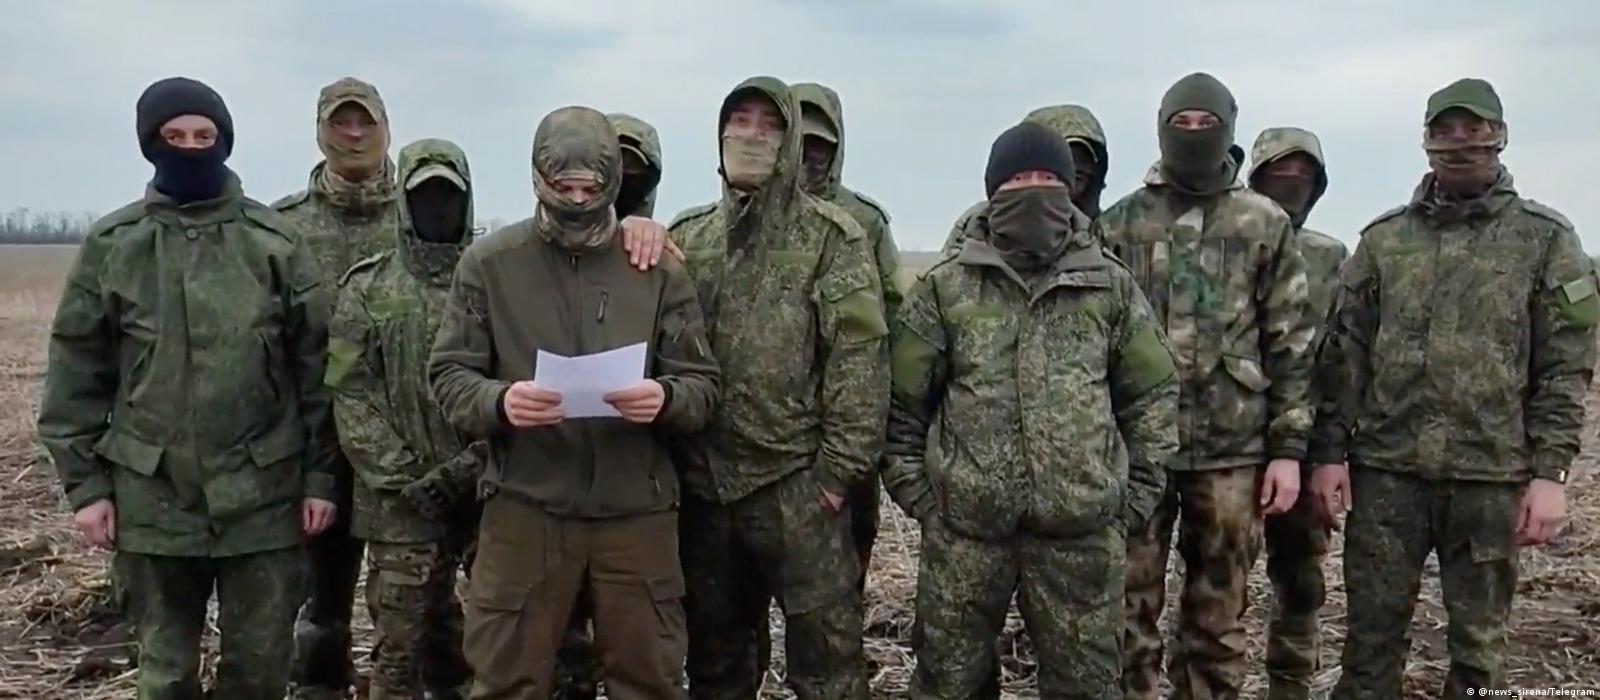 Russian soldiers complain about conditions and ask Putin for help